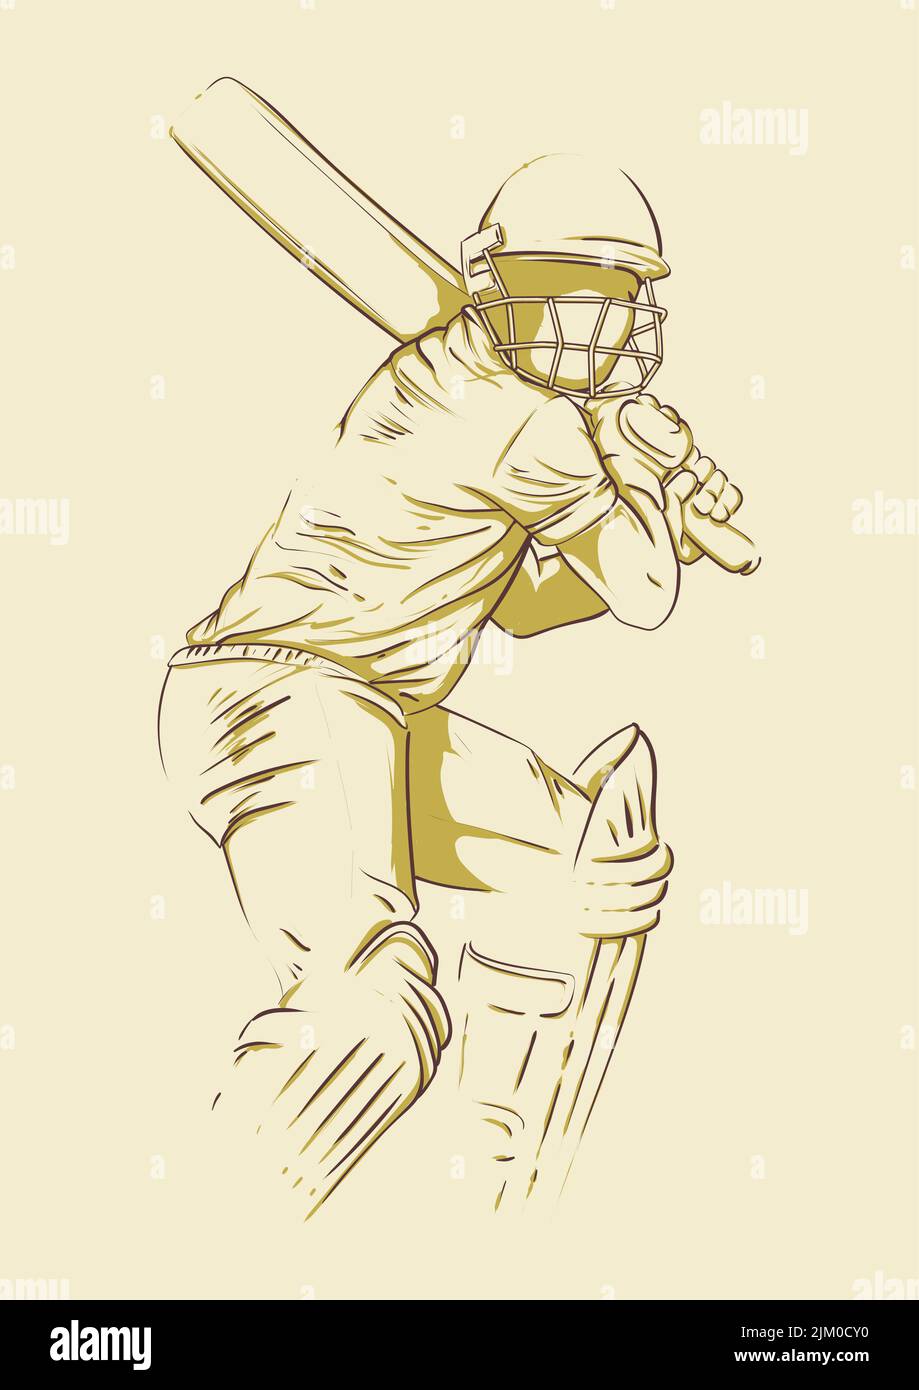 Sporting gear set. Cricketer equipment and accessories flat design